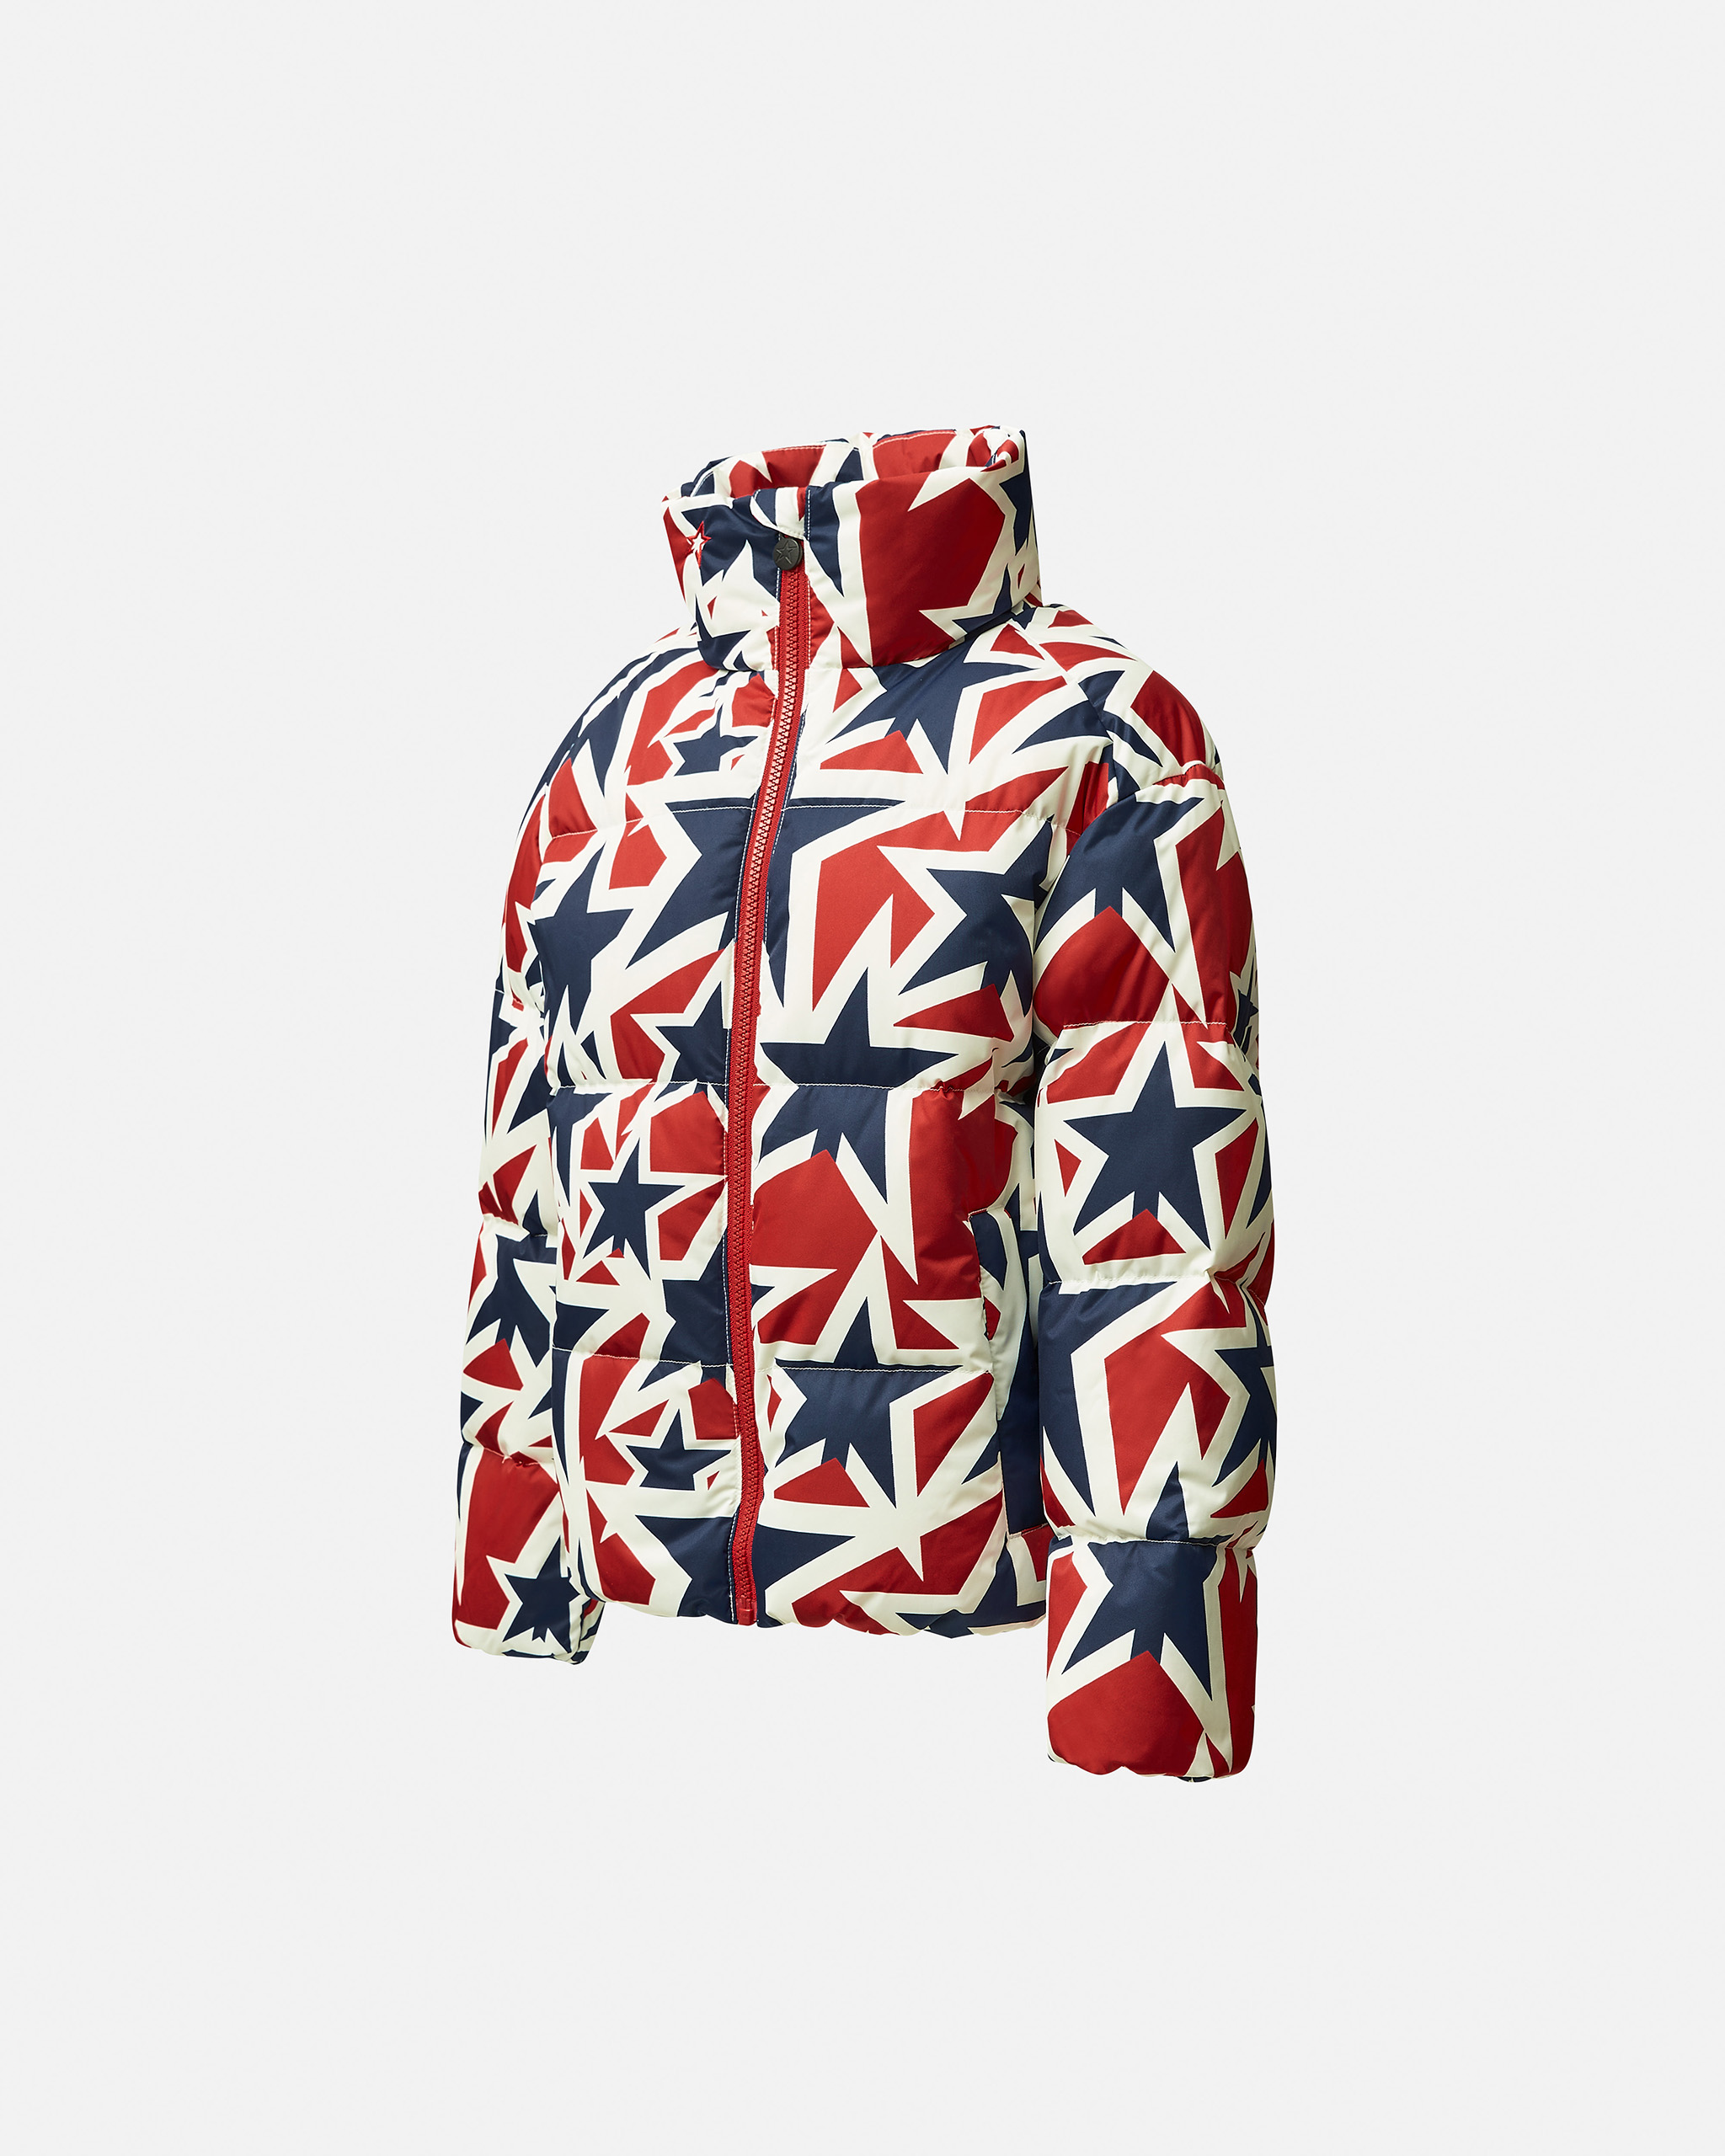 Perfect Moment Nova Star Nuuk Down Puffer Y14 In Nova-star-navy-snow-white-red